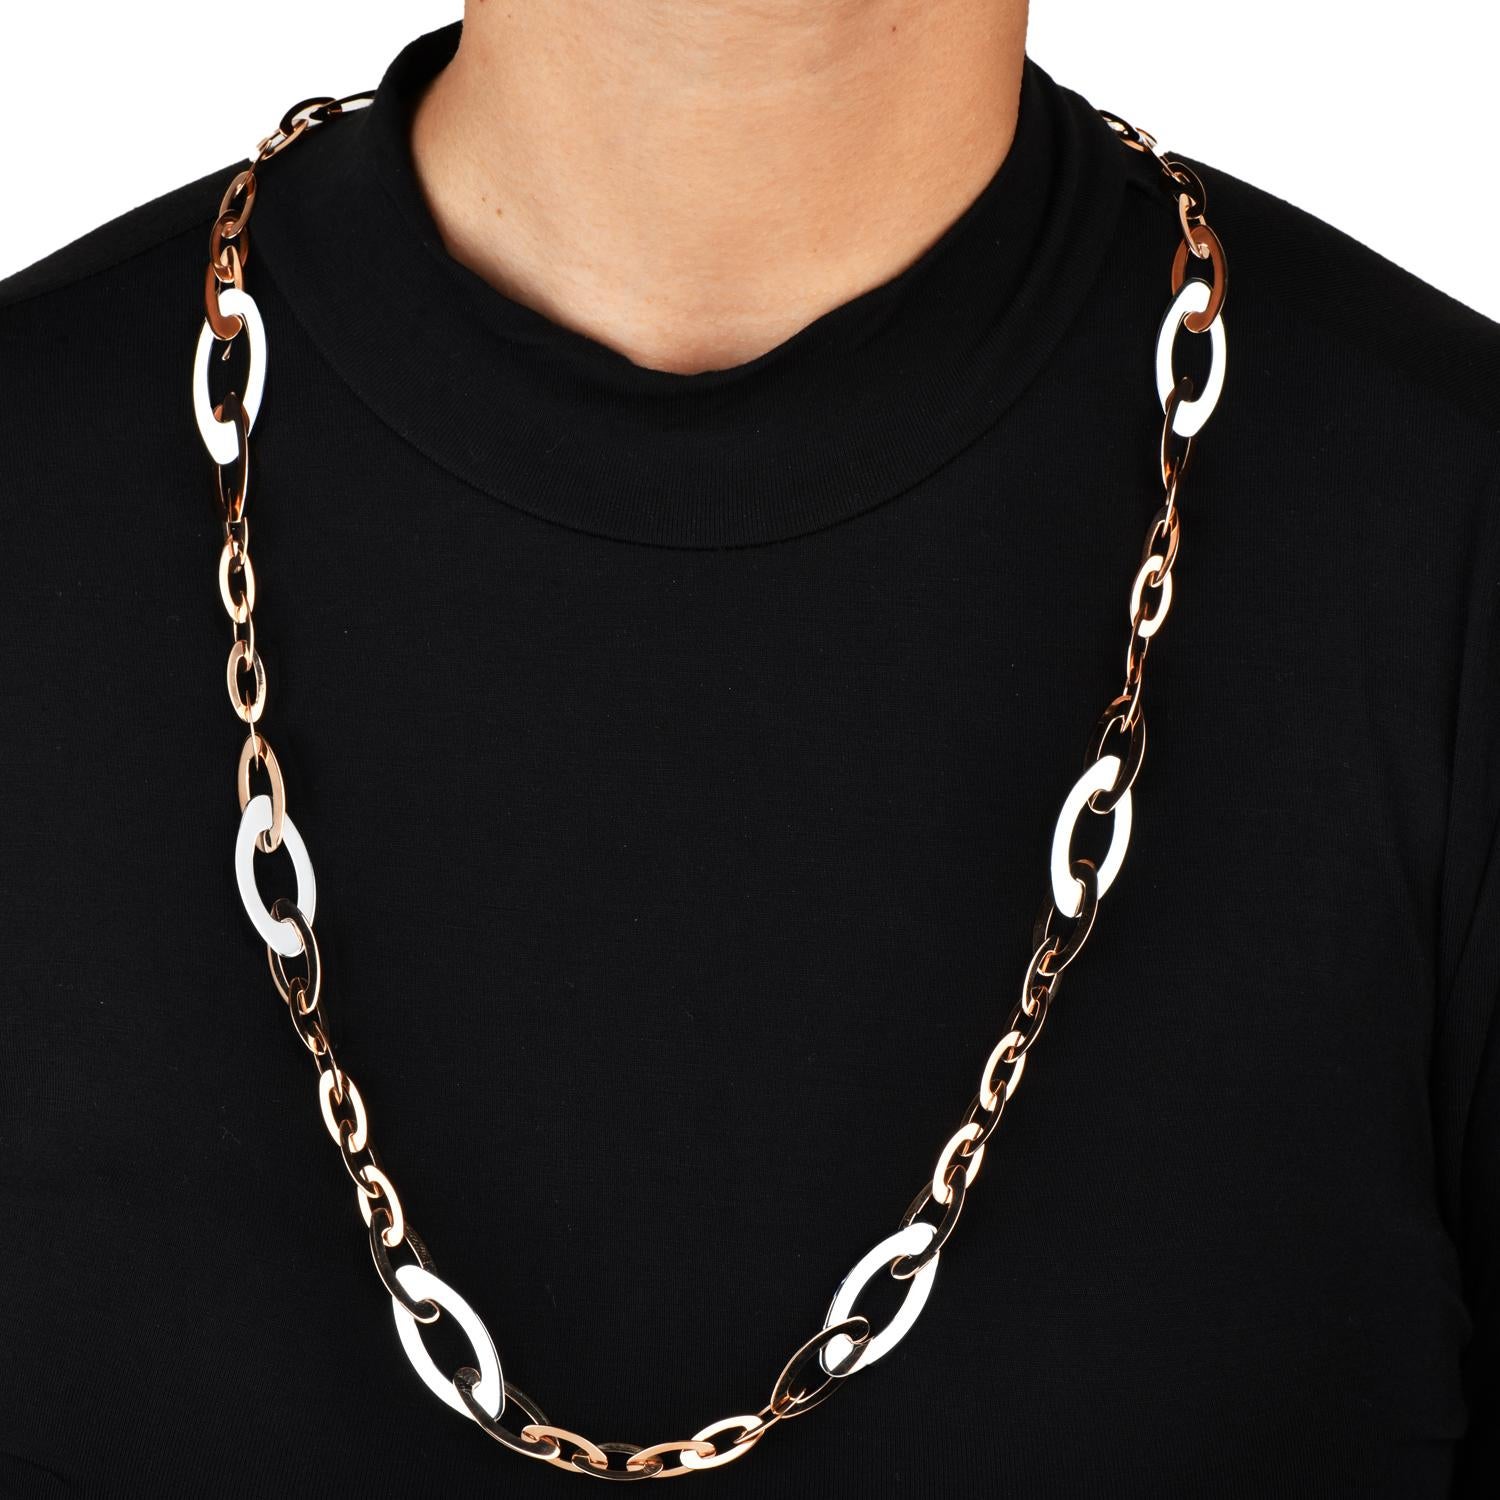 The Roberto Coin Necklace is a luxurious piece of jewelry designed by Roberto Coin, an Italian jewelry designer known for his elegant and innovative creations.

This particular necklace is part of the Chic And Shine Collection, which showcases the